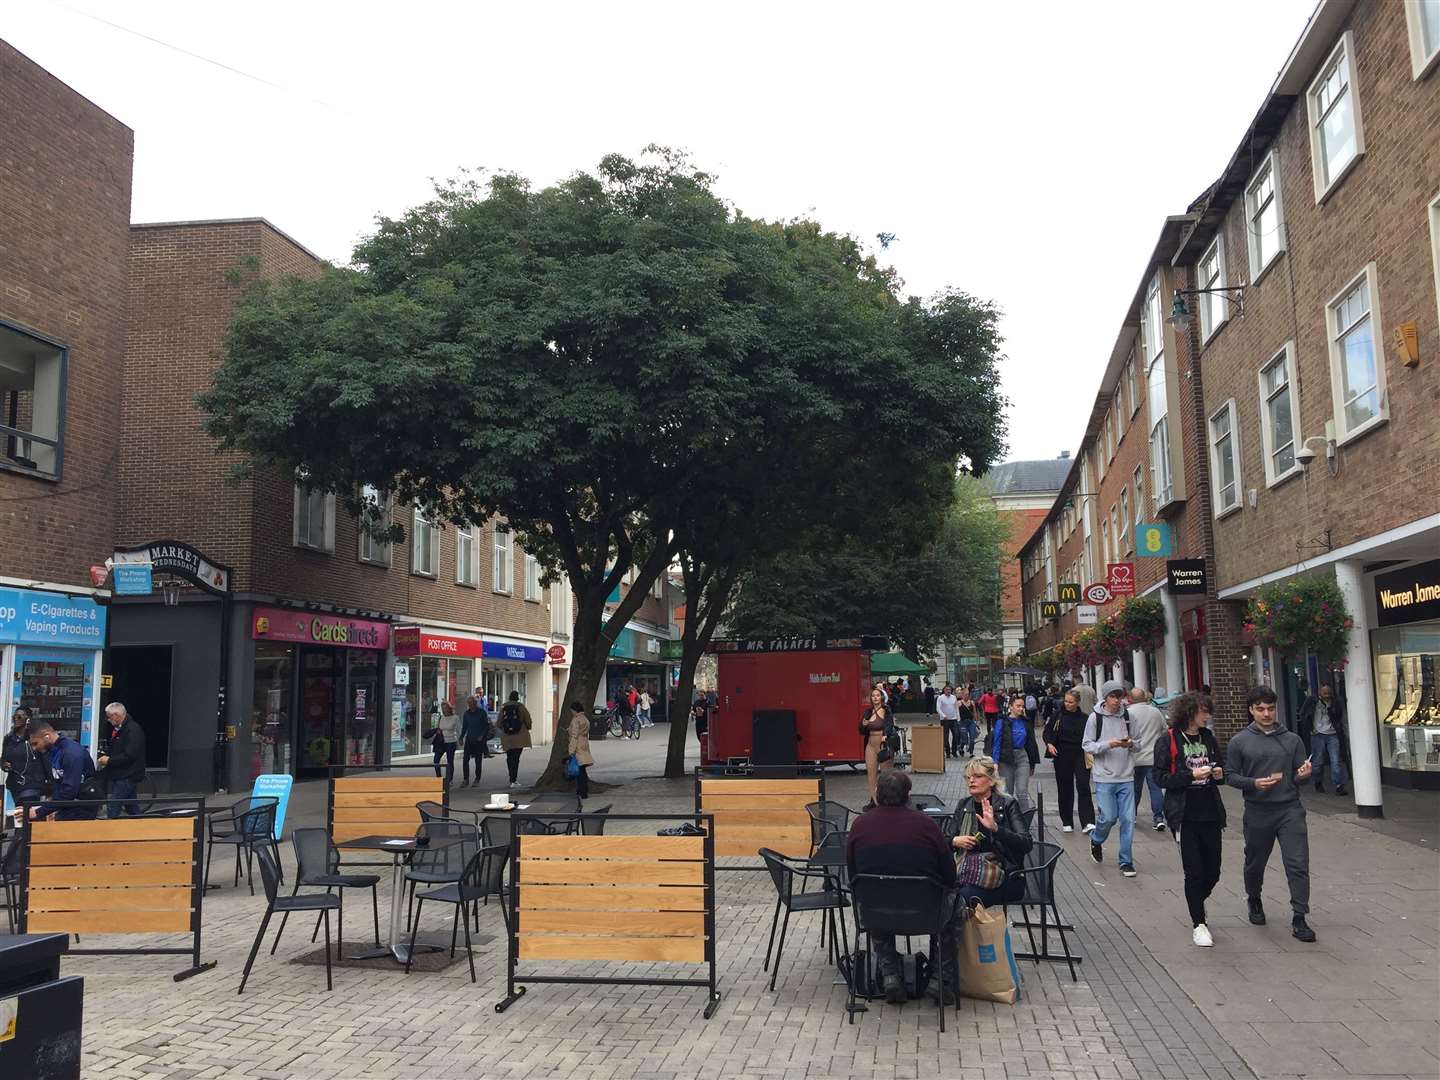 The trees in St George's Street, Canterbury, that are set to be felled